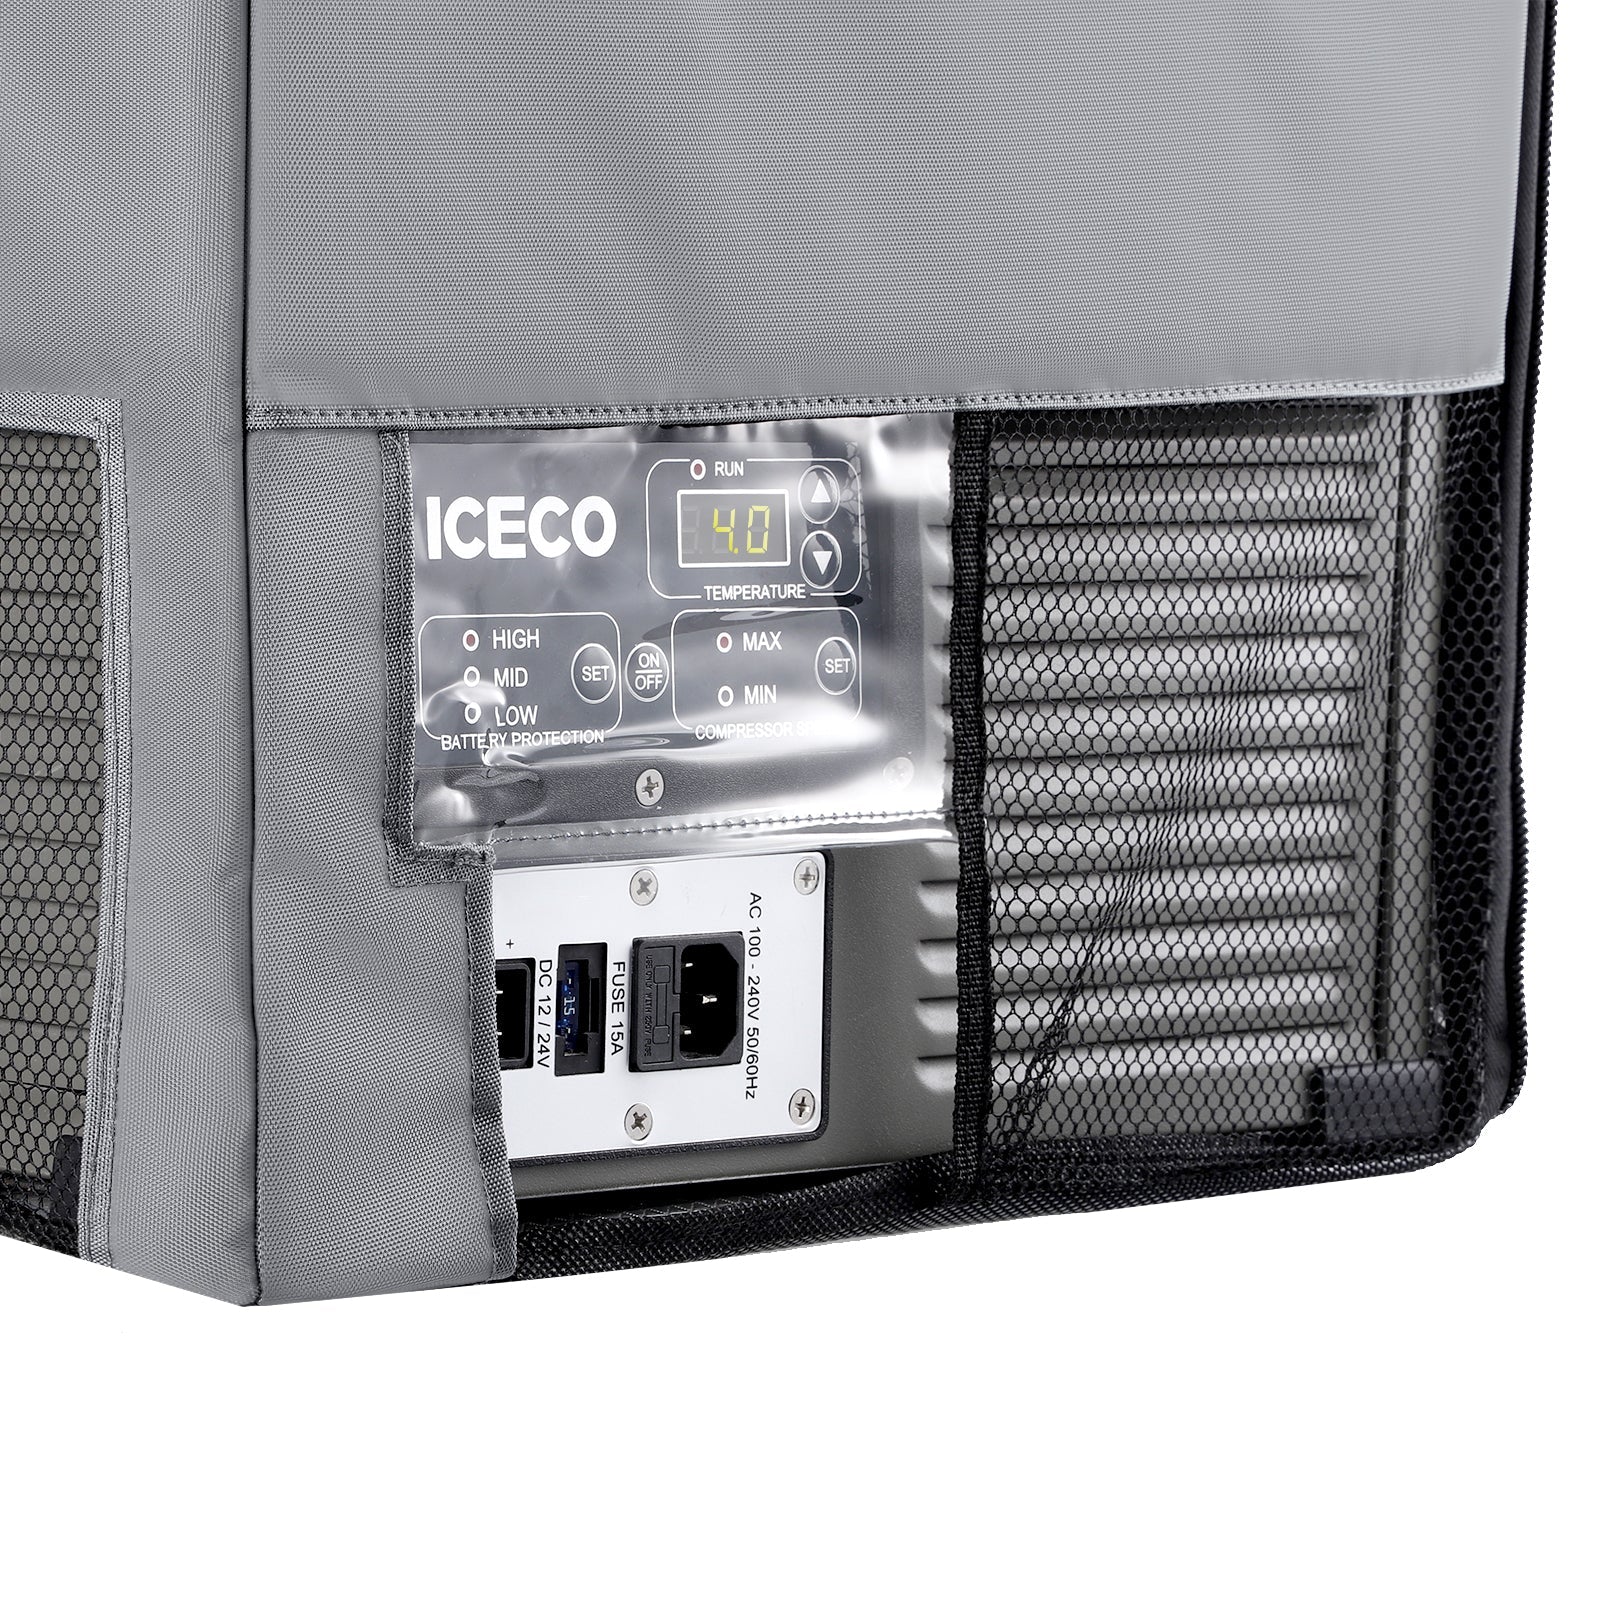 Upgraded Protective Cover For VL45 Single Zone| ICECO-accessories-www.icecofreezer.com